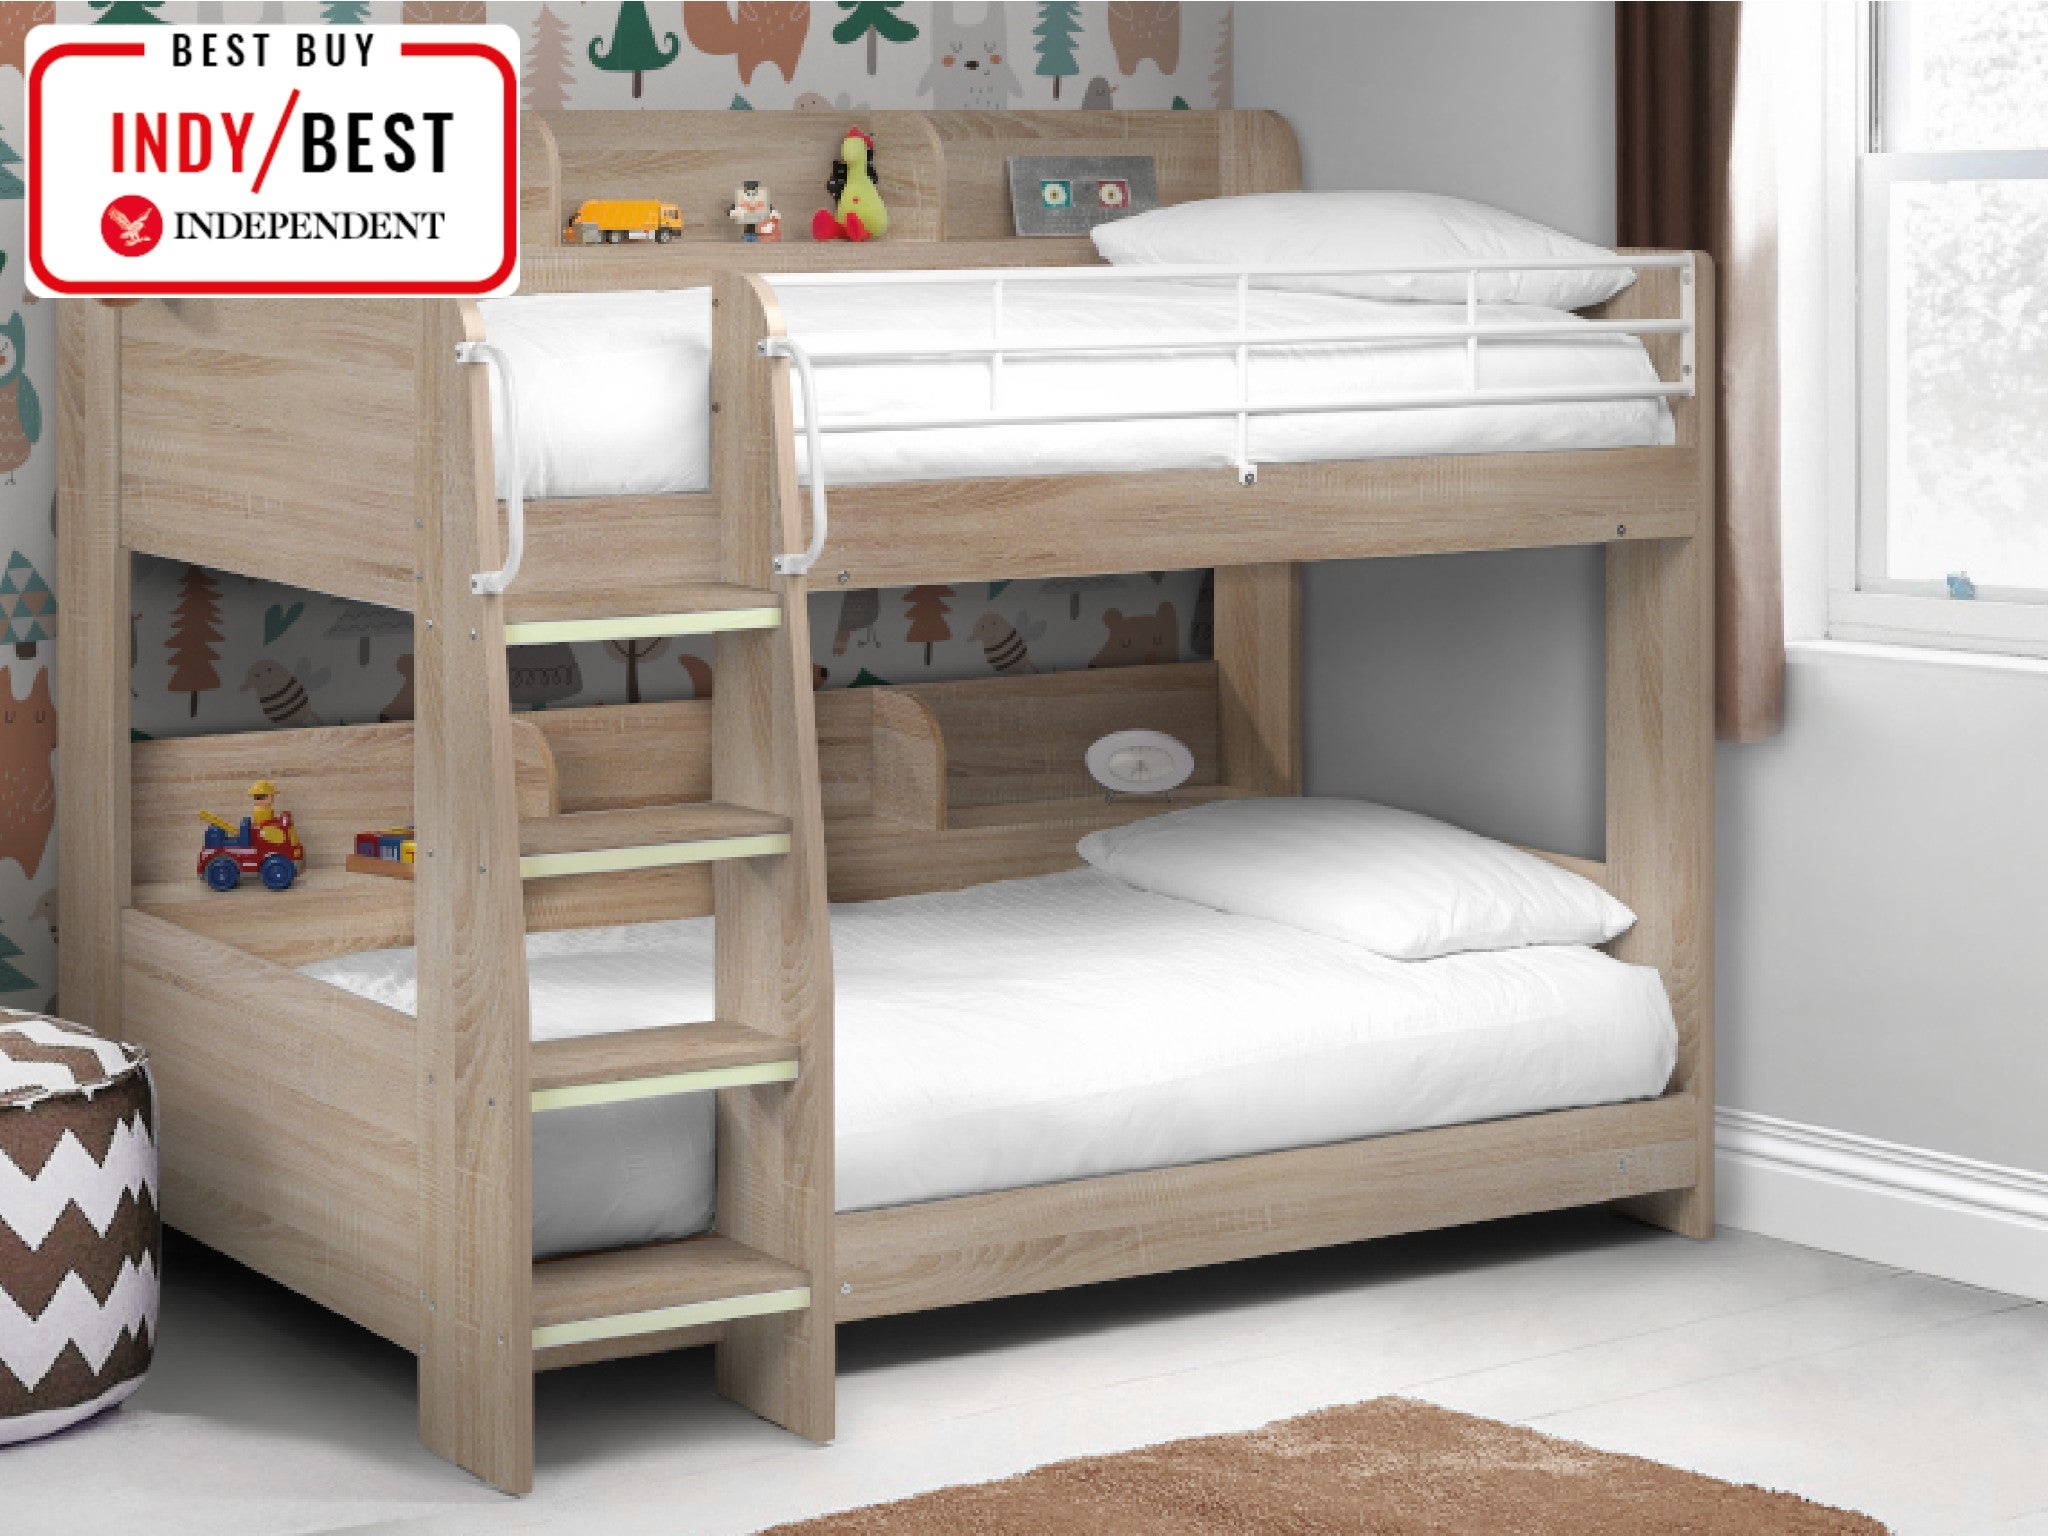 TOP QUALITY Brand New WHITE WOODEN BUNK BED with  Mattresses 